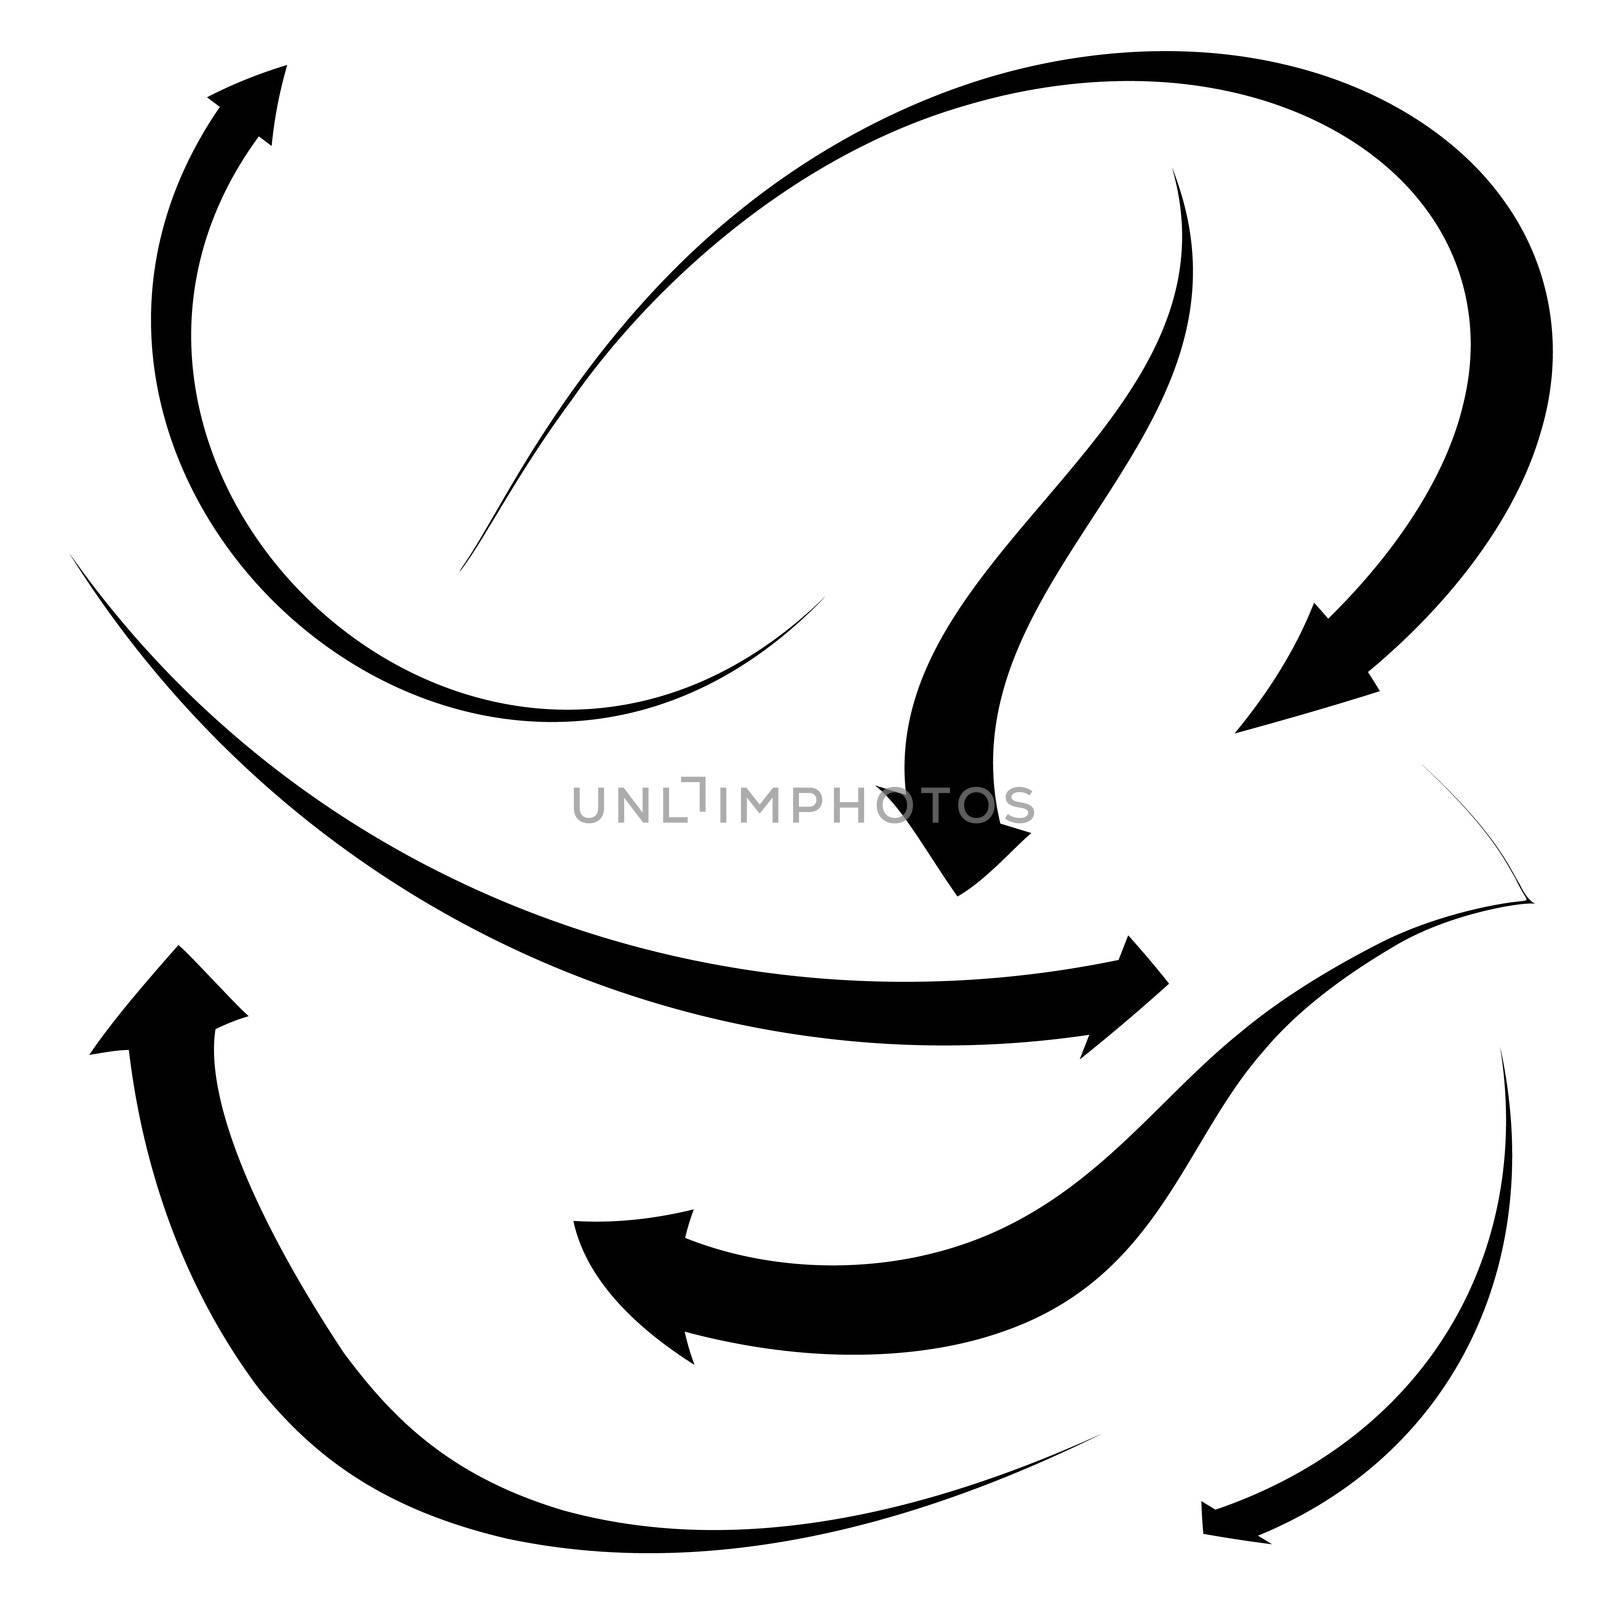 Collection of black arrows in various bended positions on a white background